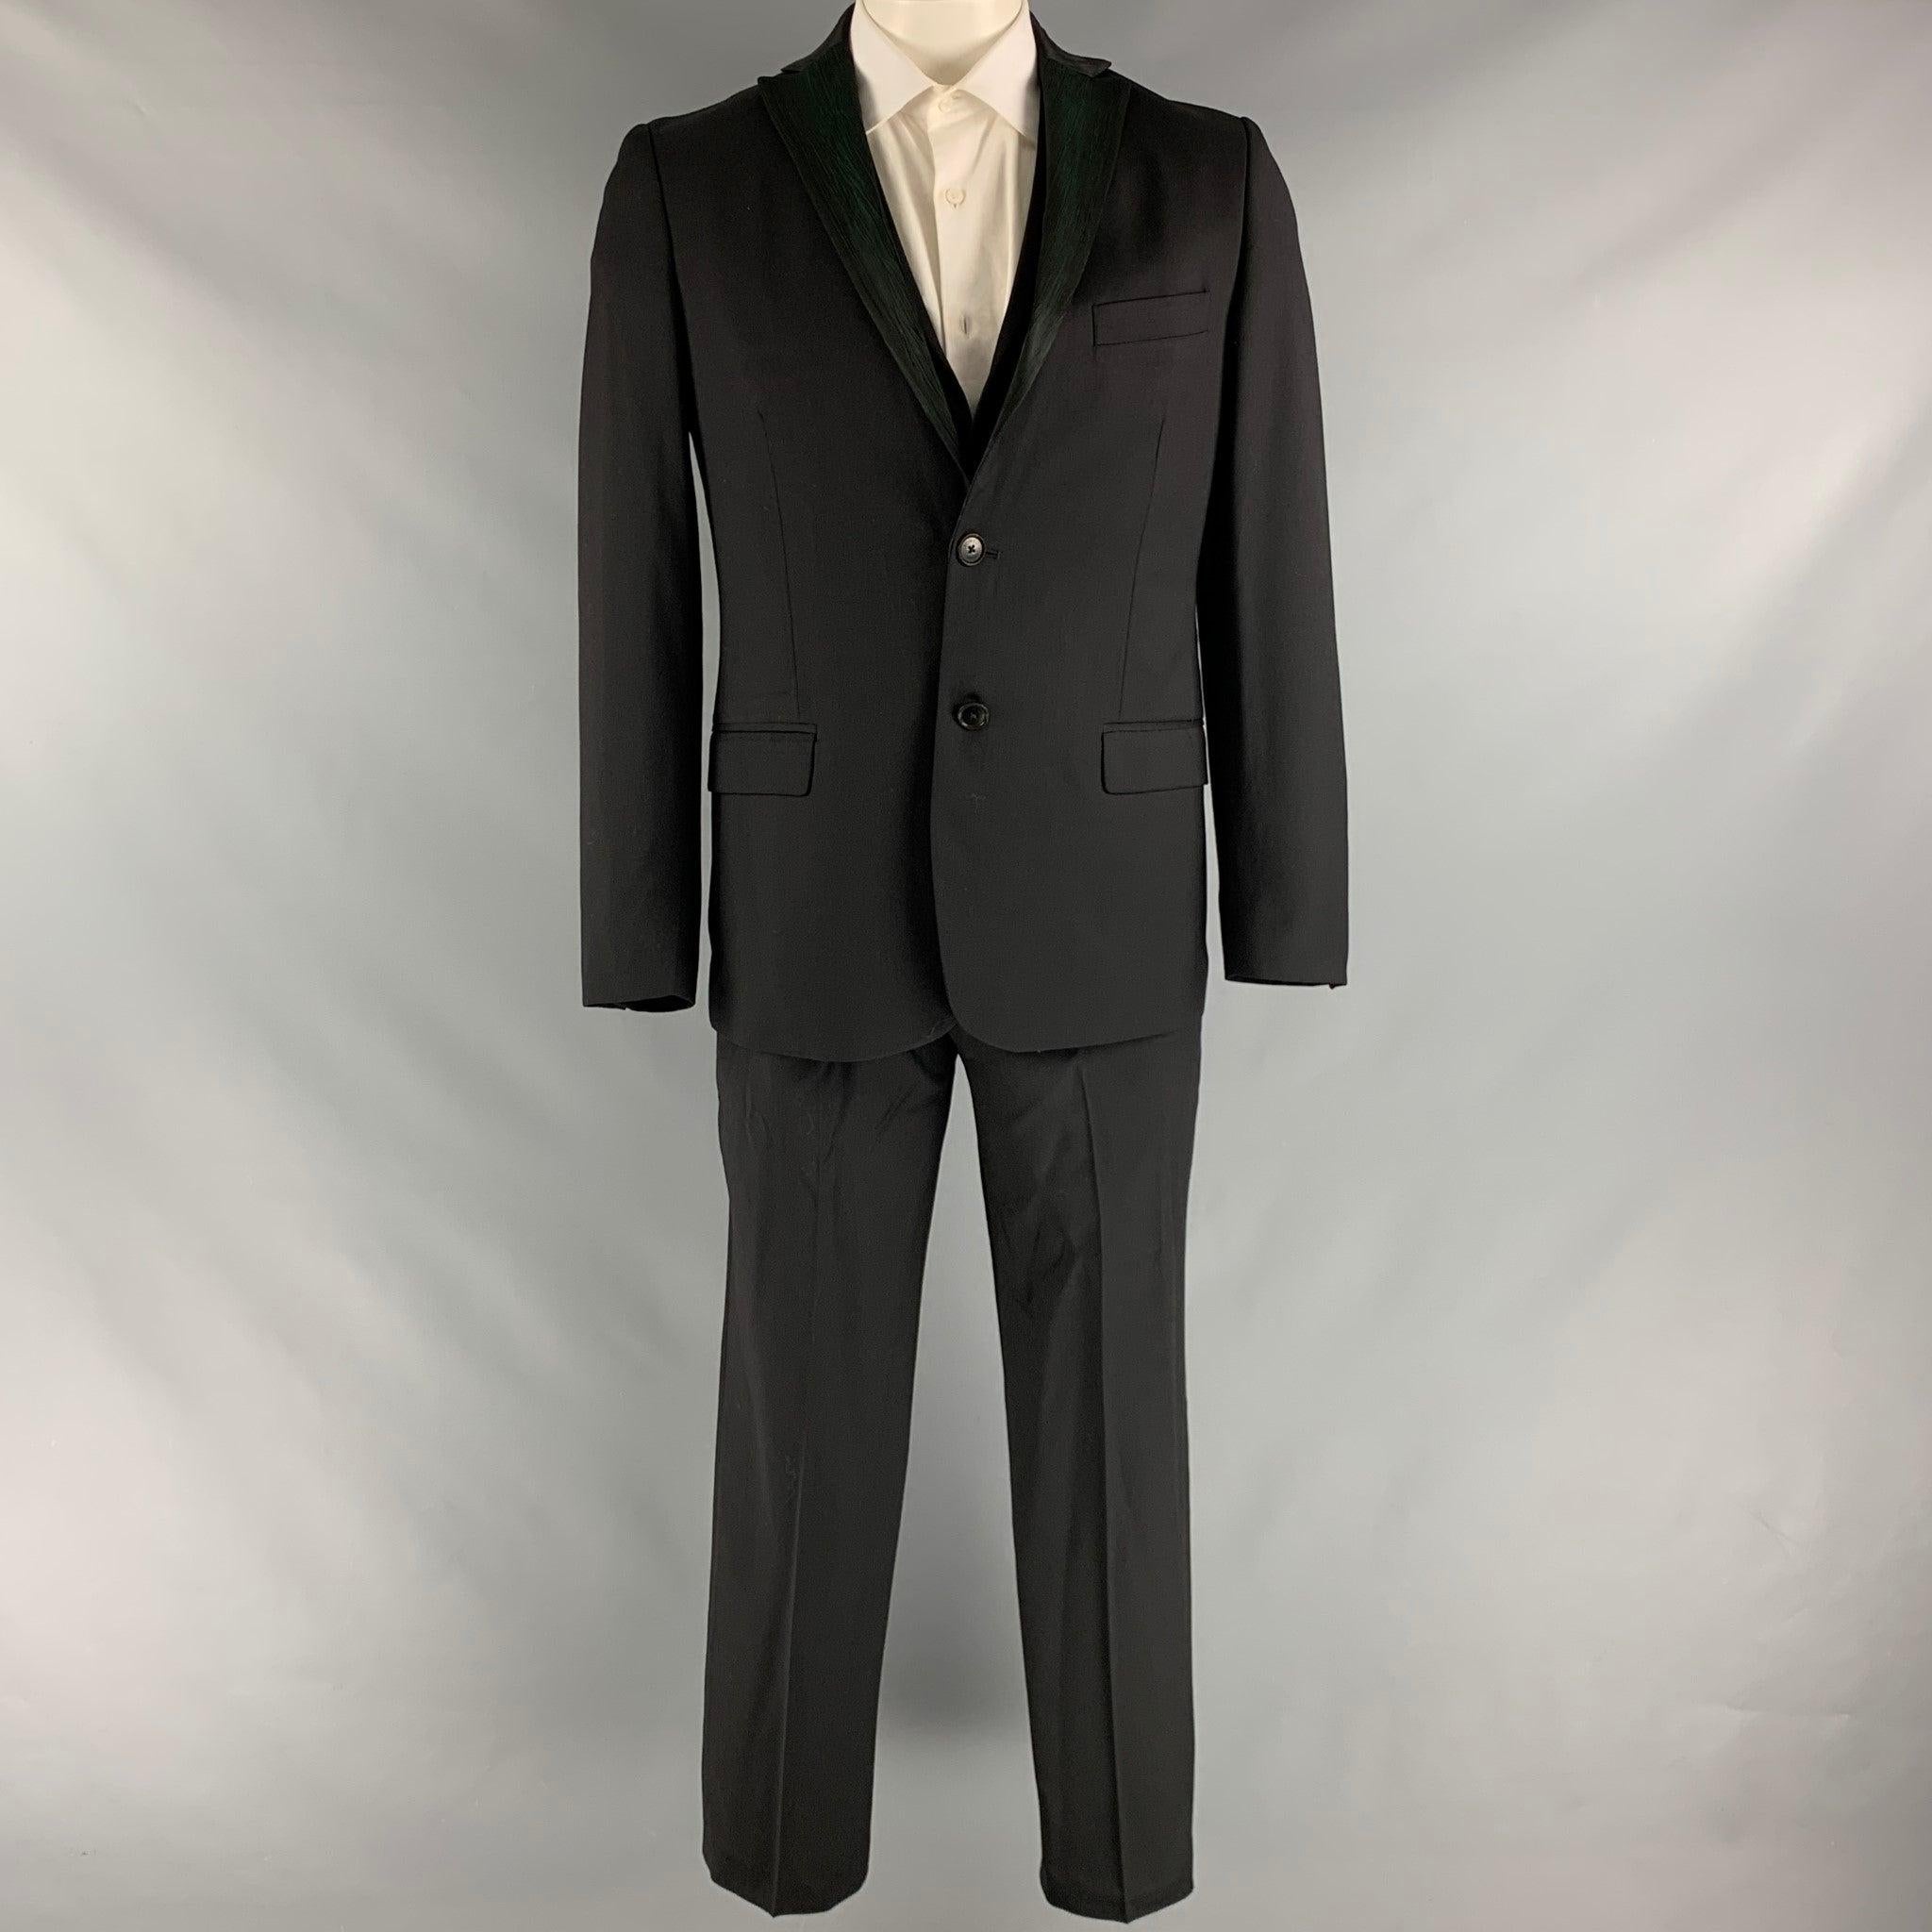 ROMEO GIGLI 3 Piece suit comes in a black and green wool woven material with a full liner and includes a single breasted, double button sport coat with a notch lapel and a matching vest and flat front trousers. Made in Italy.Excellent Pre-Owned